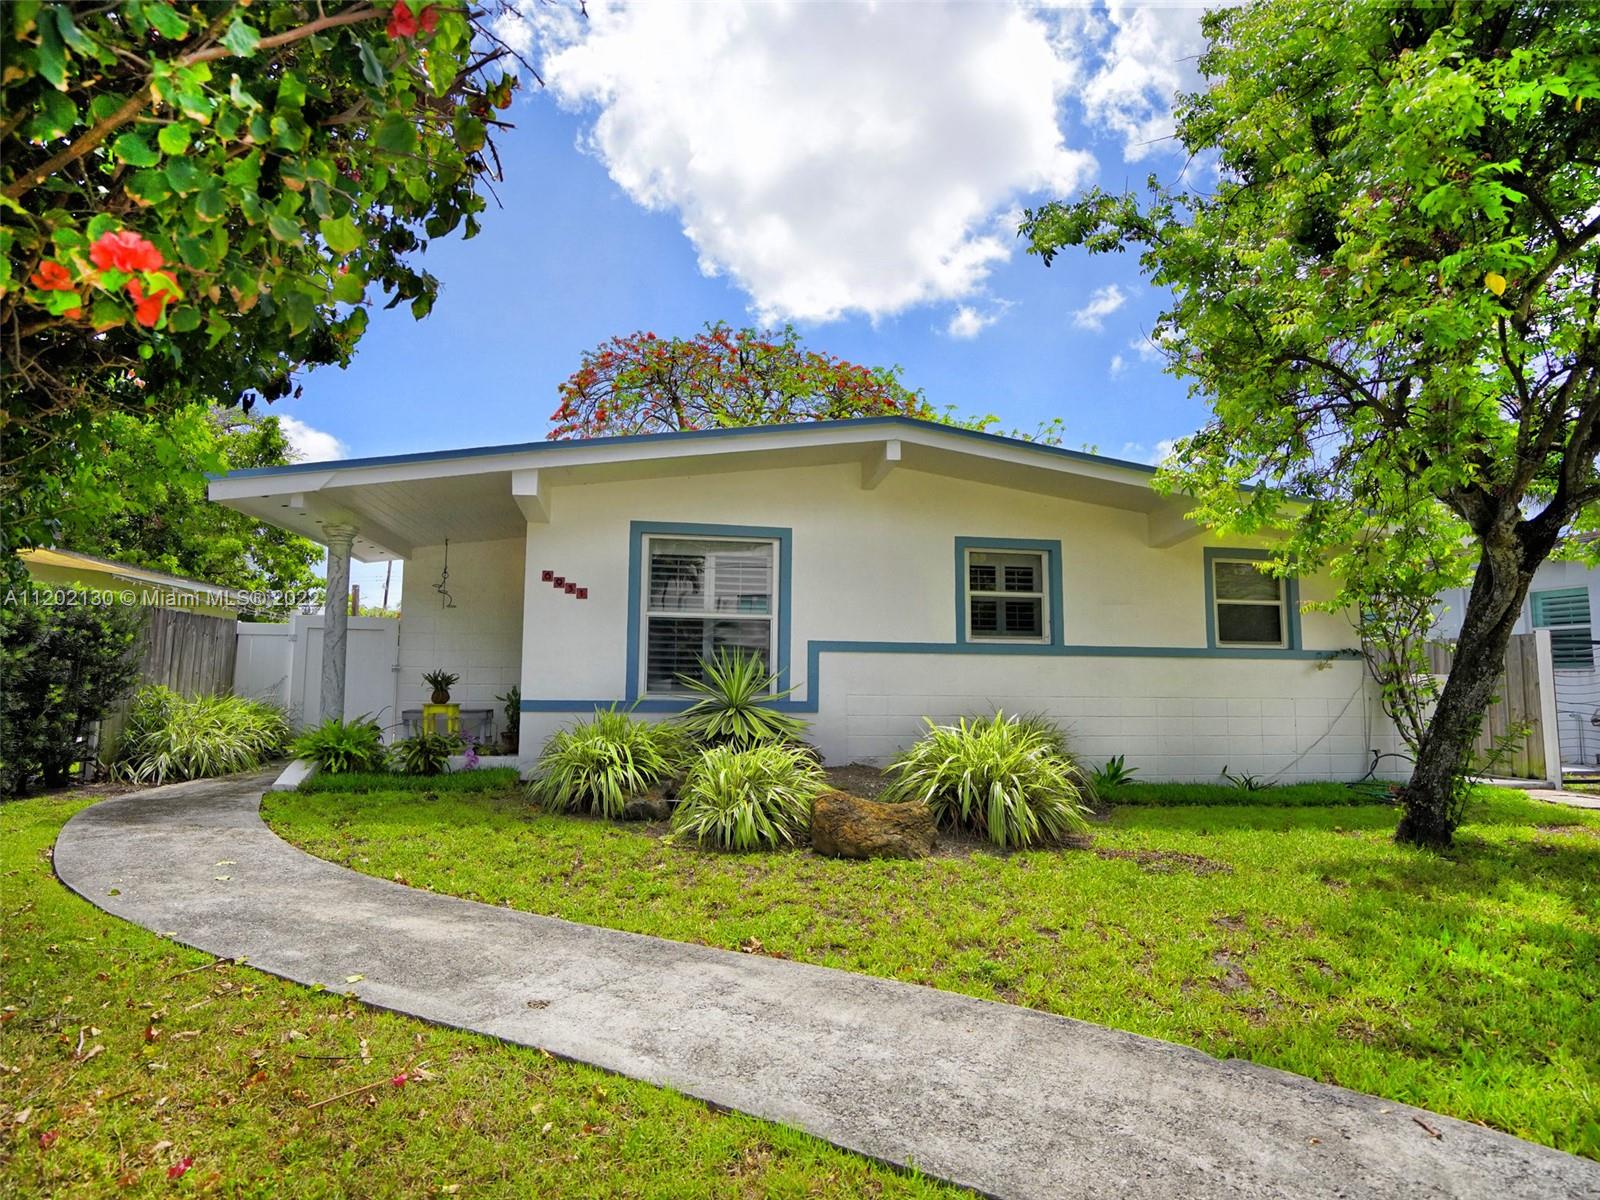 Charming home in the heart of Sunset Pines. This well-situated property boasts close proximity to Kendall, lower South Miami, and even Westchester. The house has 3 bedrooms and 1 bathroom, a cozy living room area, kitchen and dining room. The backyard has plenty of space for outdoor activities. A cement patio wraps the side of the house as well as some awnings which provide shade. Don't miss the opportunity to move into one of Miami's most exclusive neighborhoods. Whether you plan to start fresh or make this home your own, the investment potential is endless!